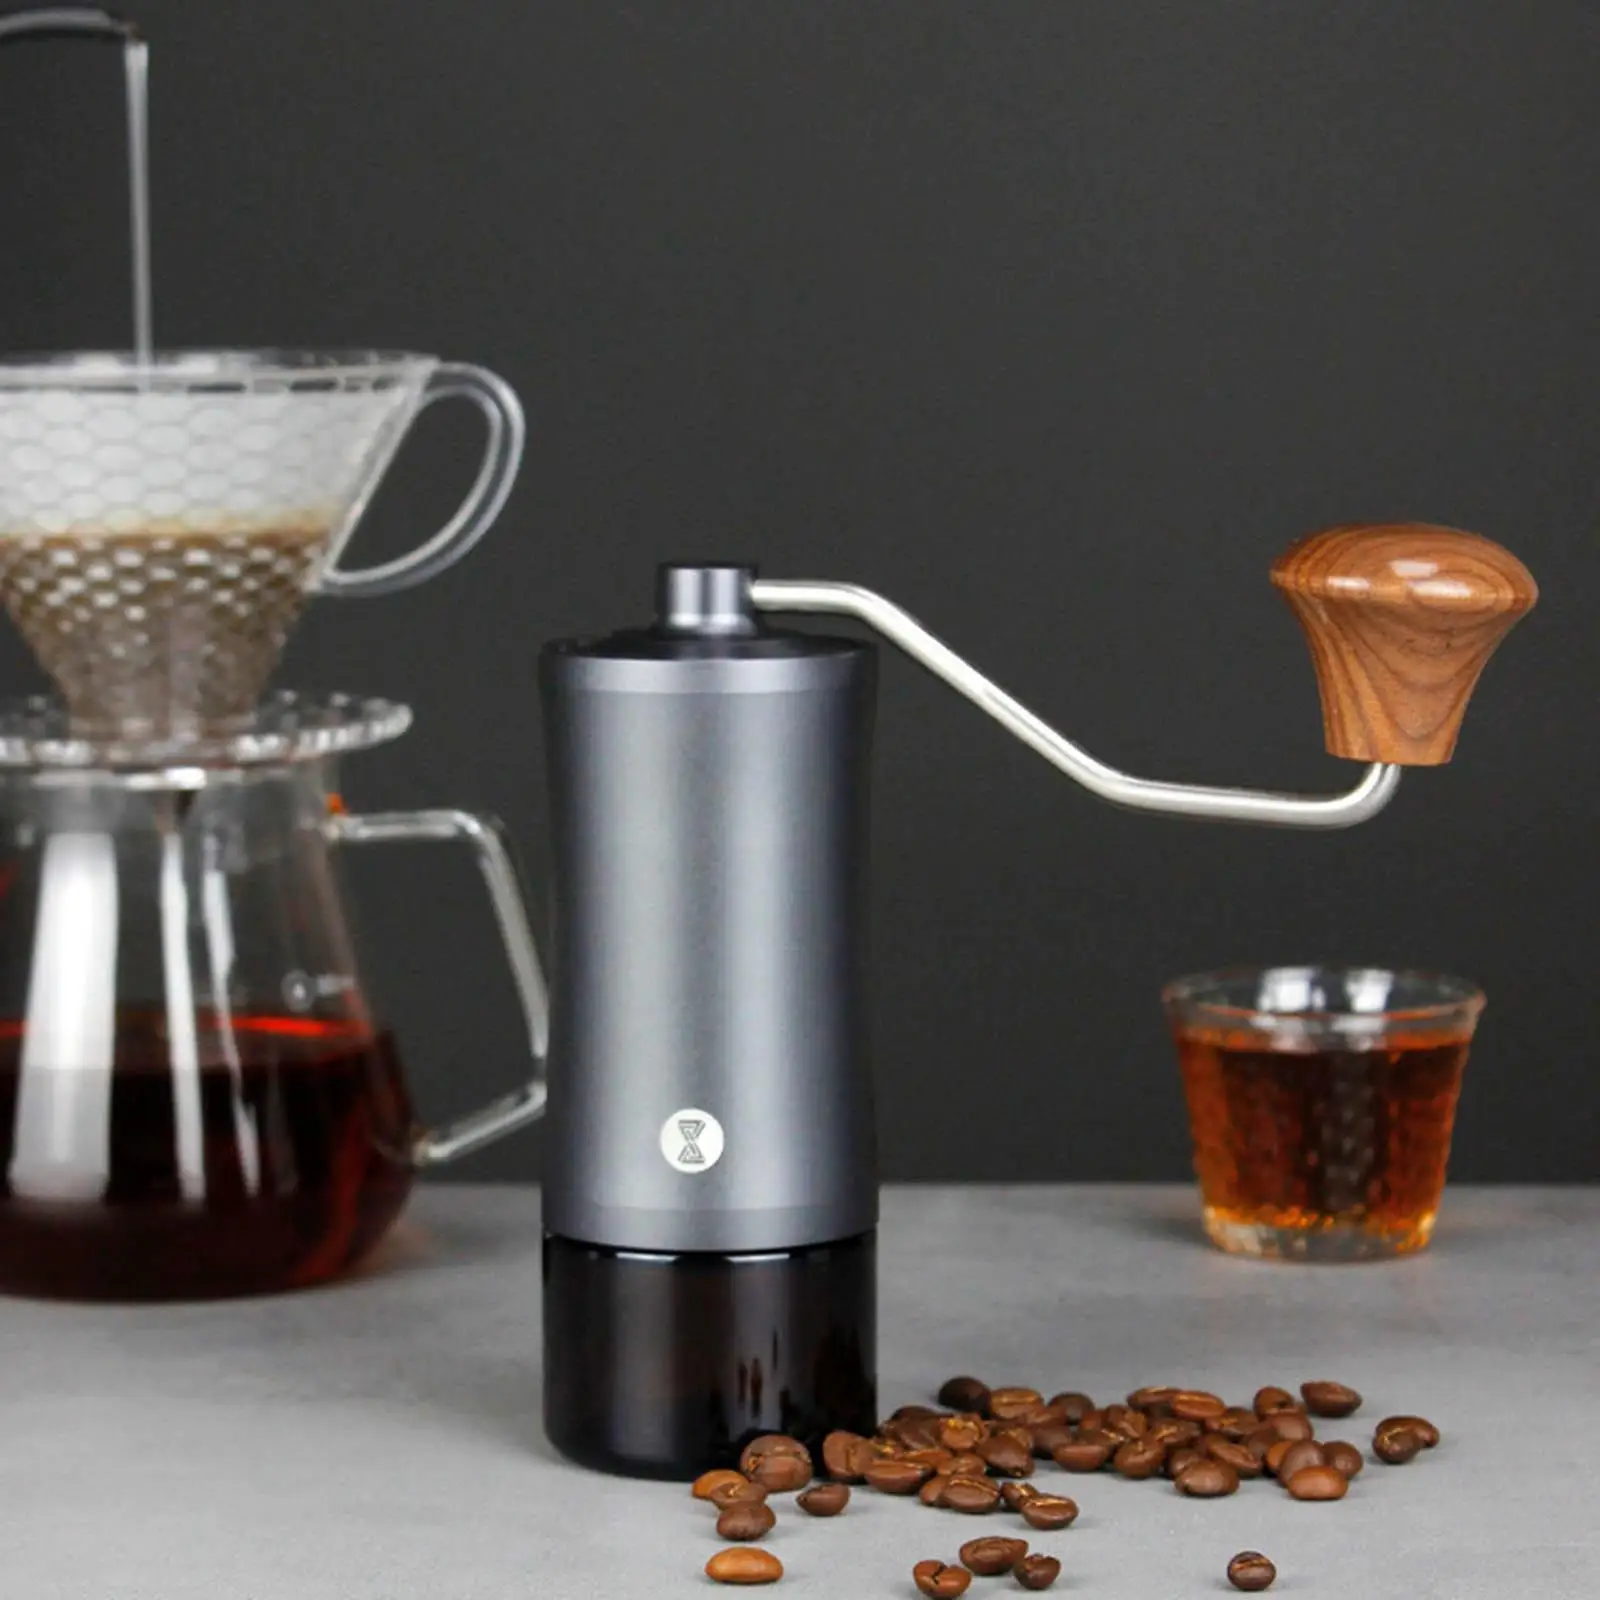 Hand Coffee Grinder Portable Coffee Mill CNC Conical Stainless Steel Burr Grinder for French Press Pour Over Kitchen Gadgets